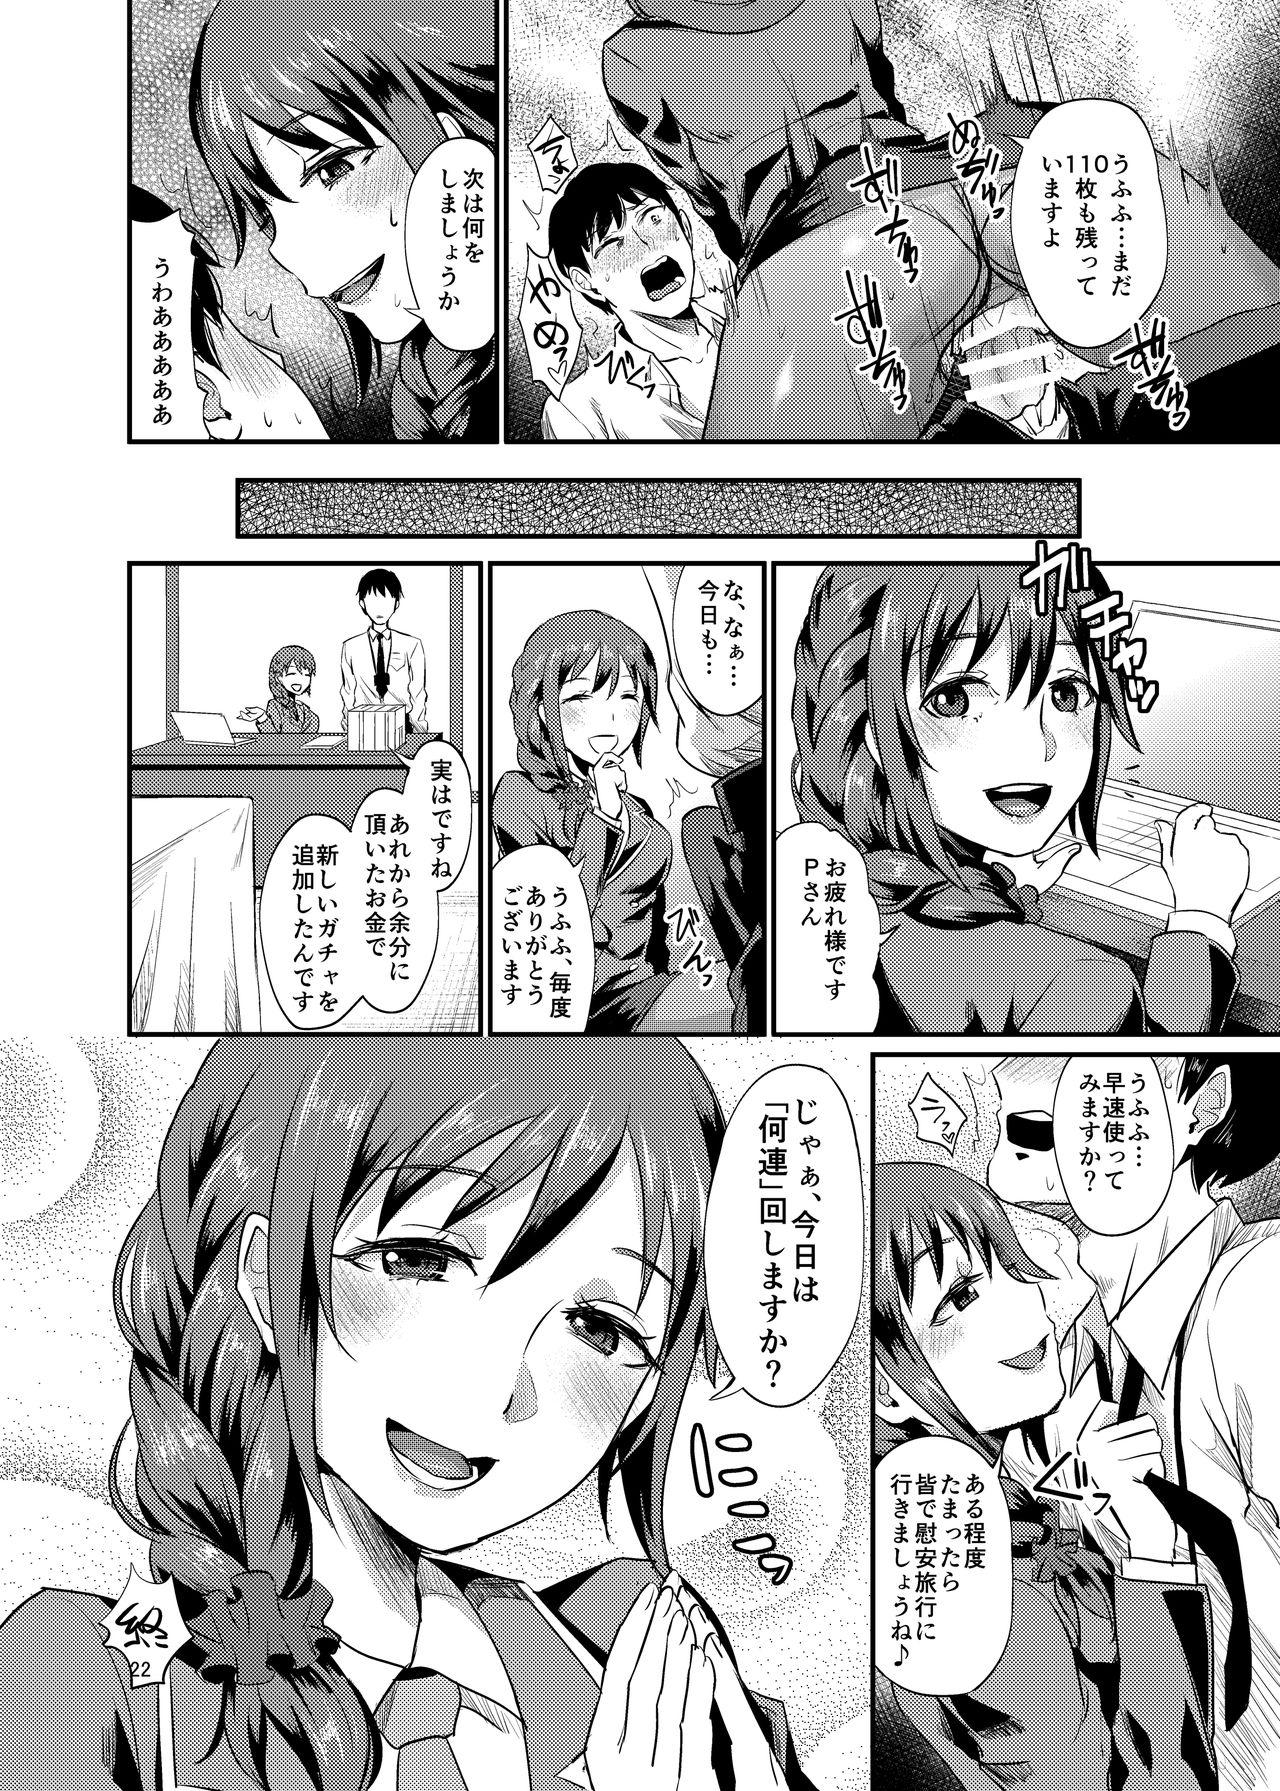 Jerkoff idolize #3 - The idolmaster Brother Sister - Page 23